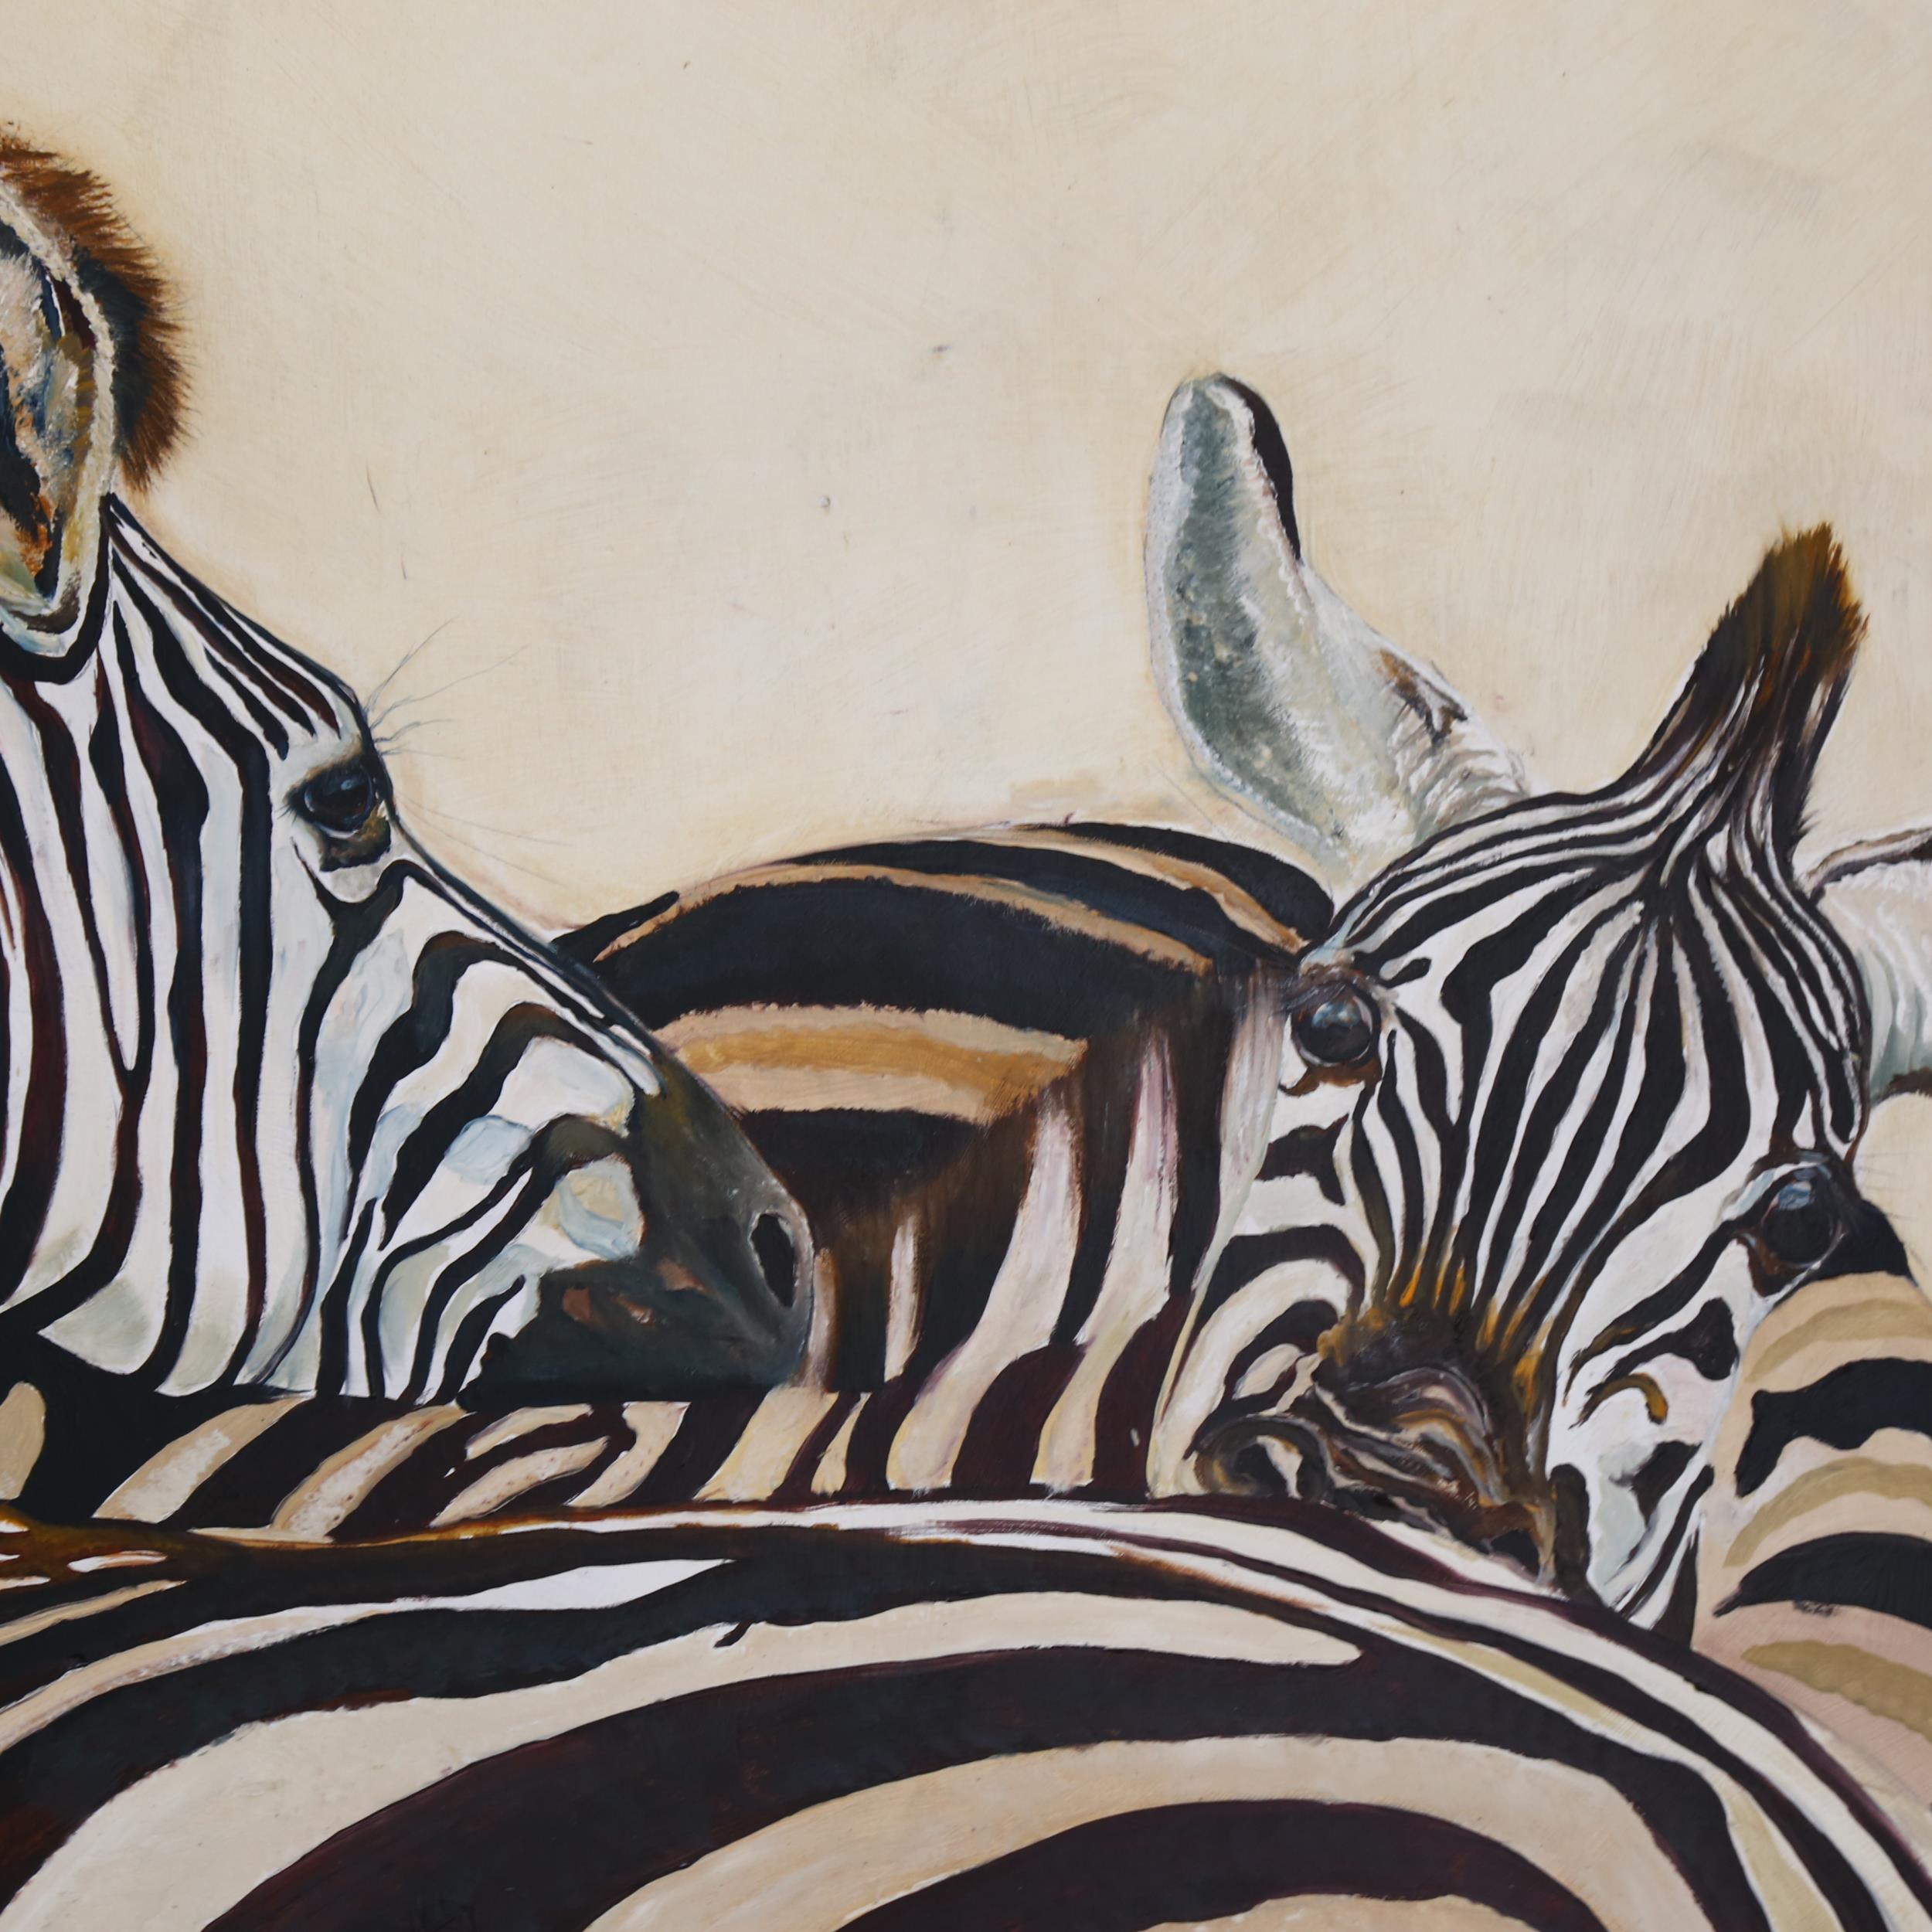 Clive Fredriksson, oil on board, study of zebras, 86cm x 100cm overall, framed - Image 2 of 2